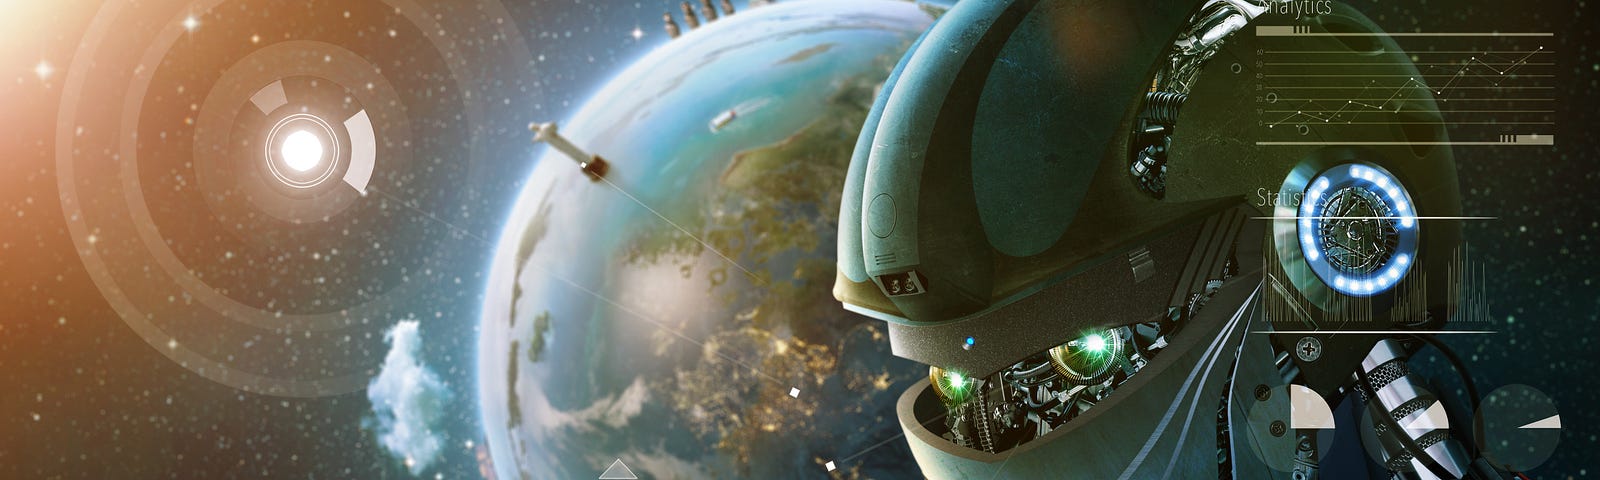 a stylish robot outlined against the planet earth in space